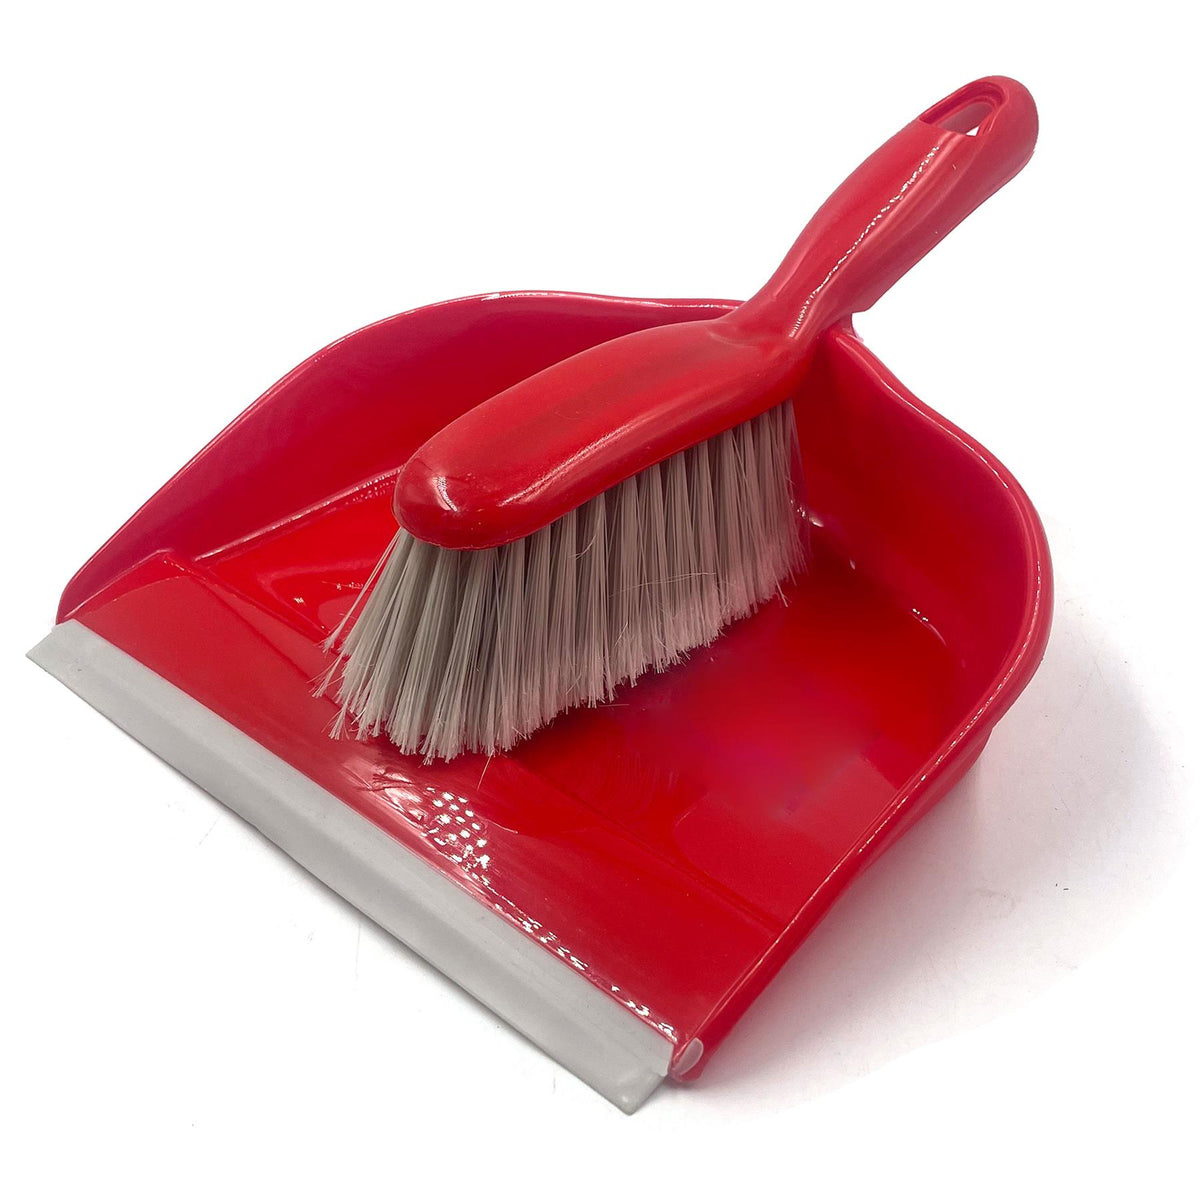 TDBS Colour Coded Dustpan Set - RED